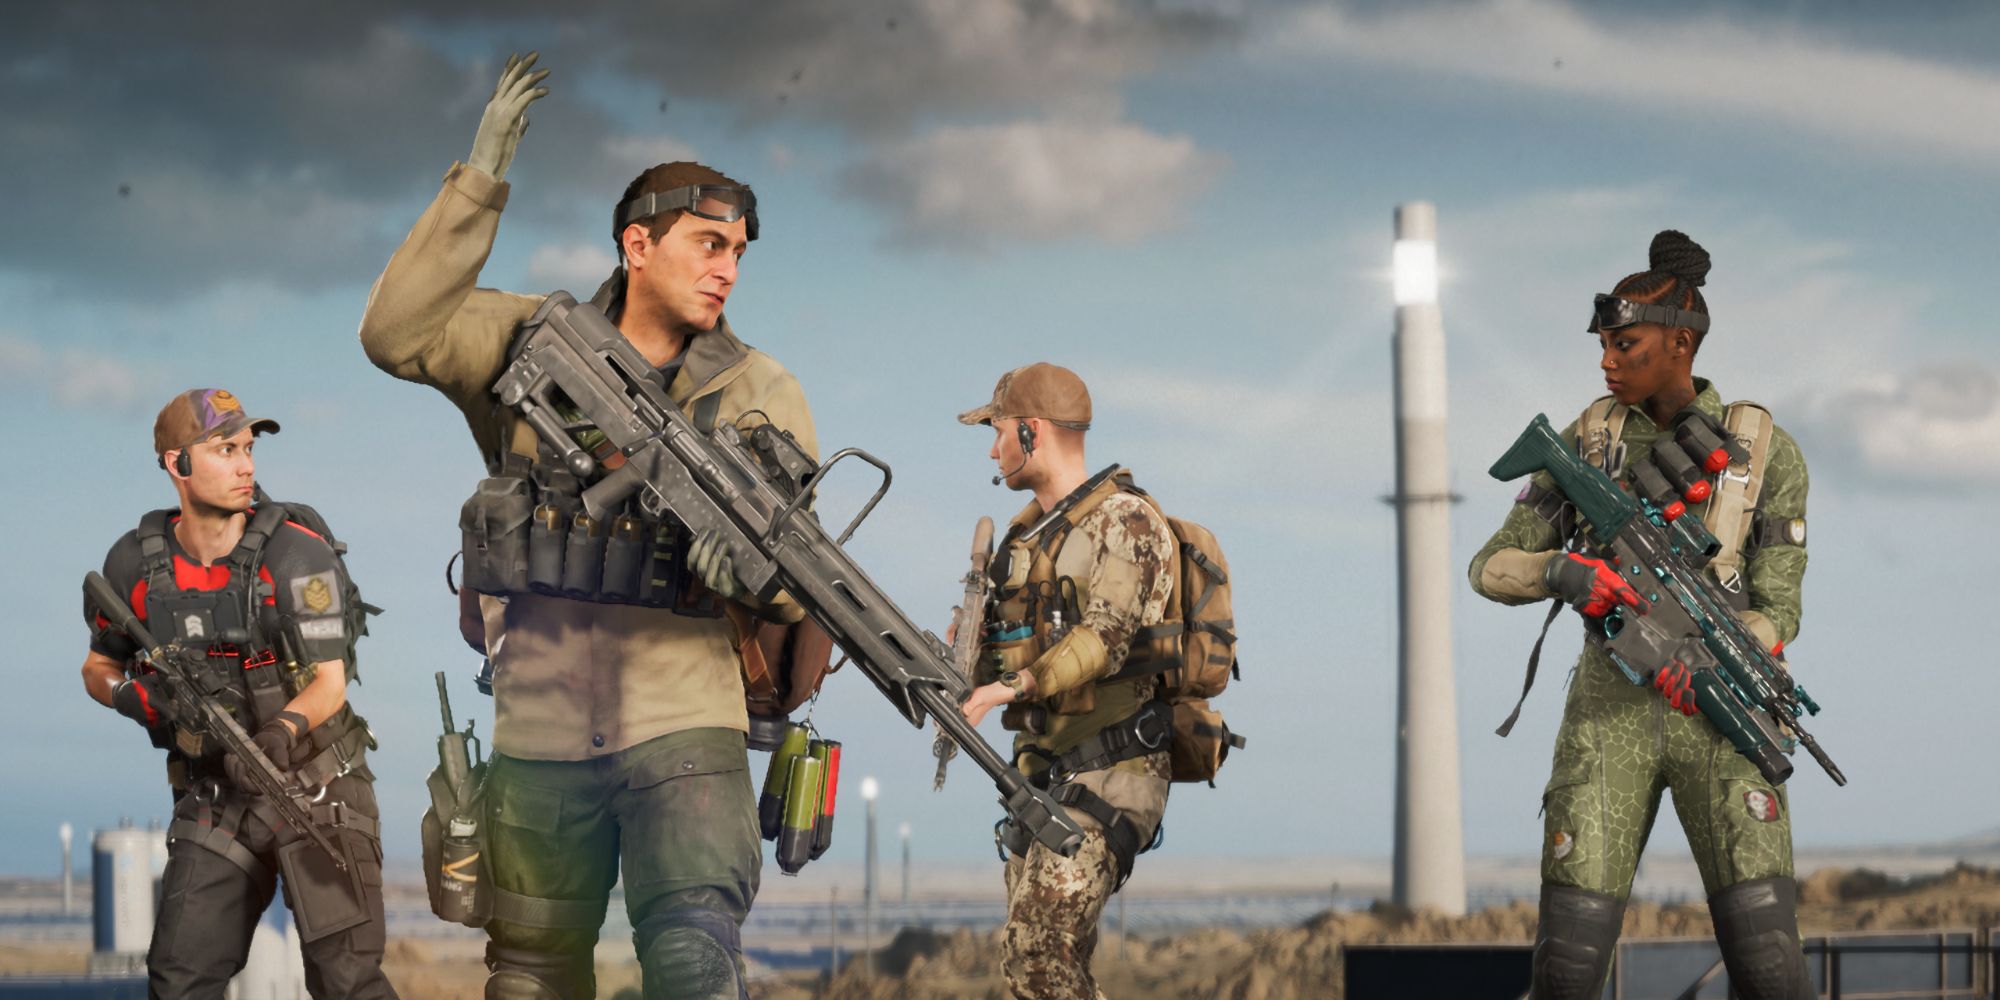 Image of 4 Battlefield 2042 characters in camouflage with guns. There is a cloudy sky and tower in the backgroun 